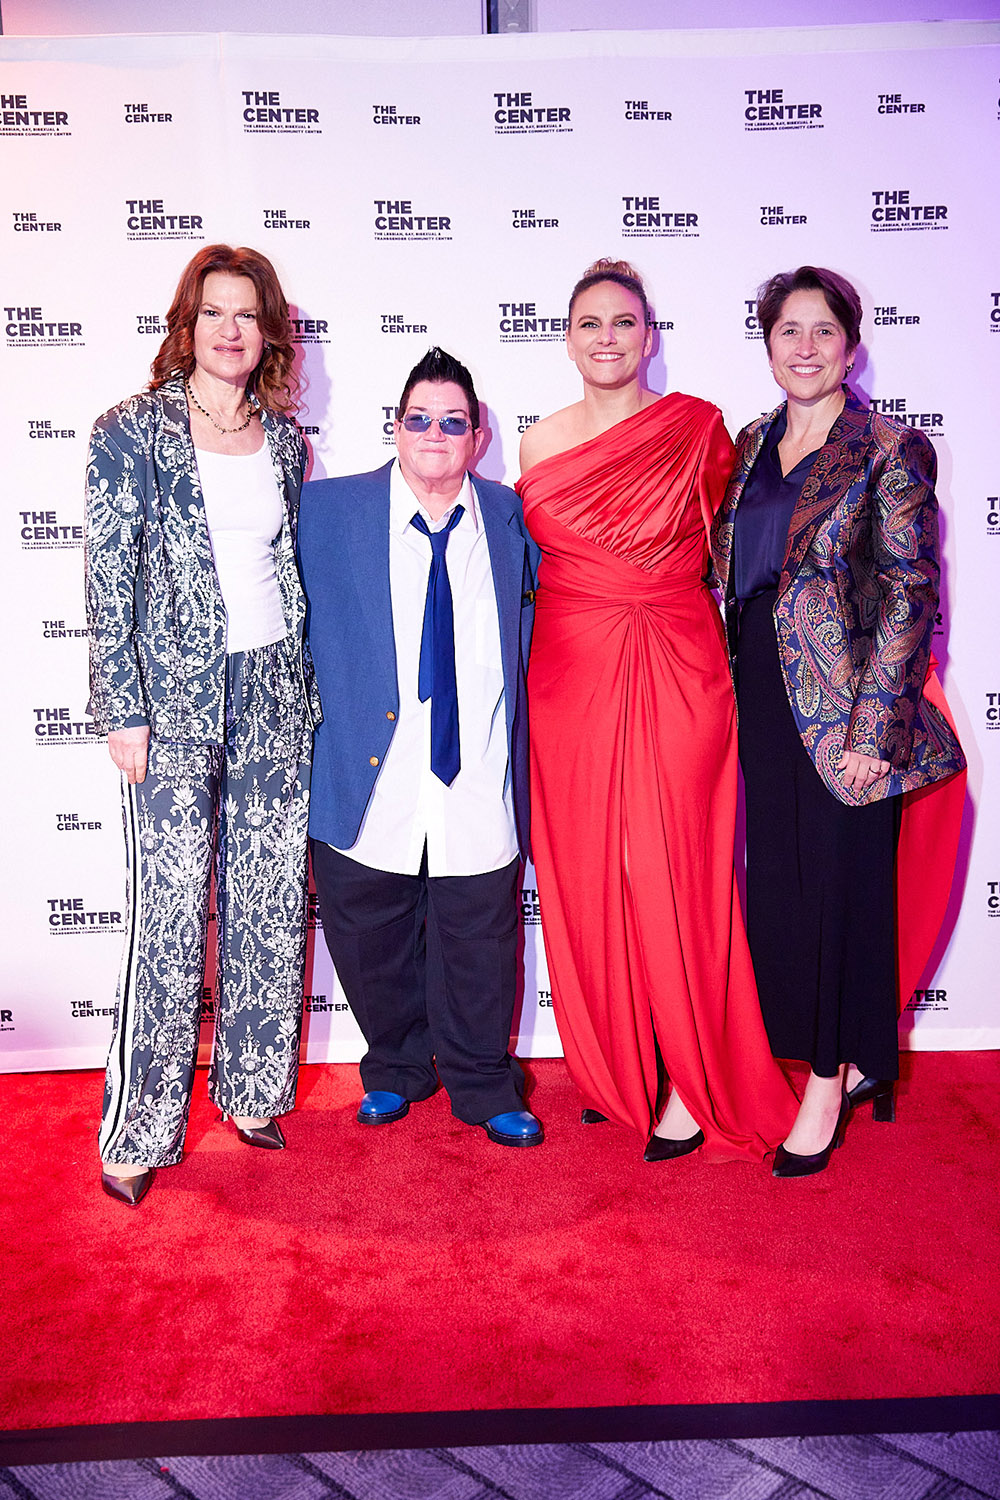 Sam Jay to Host NYC’s LGBT Community Center to Honor Lea DeLaria, Stacey Friedman, and Outgoing Executive Director Glennda Testone at Annual Women’s Event Gala